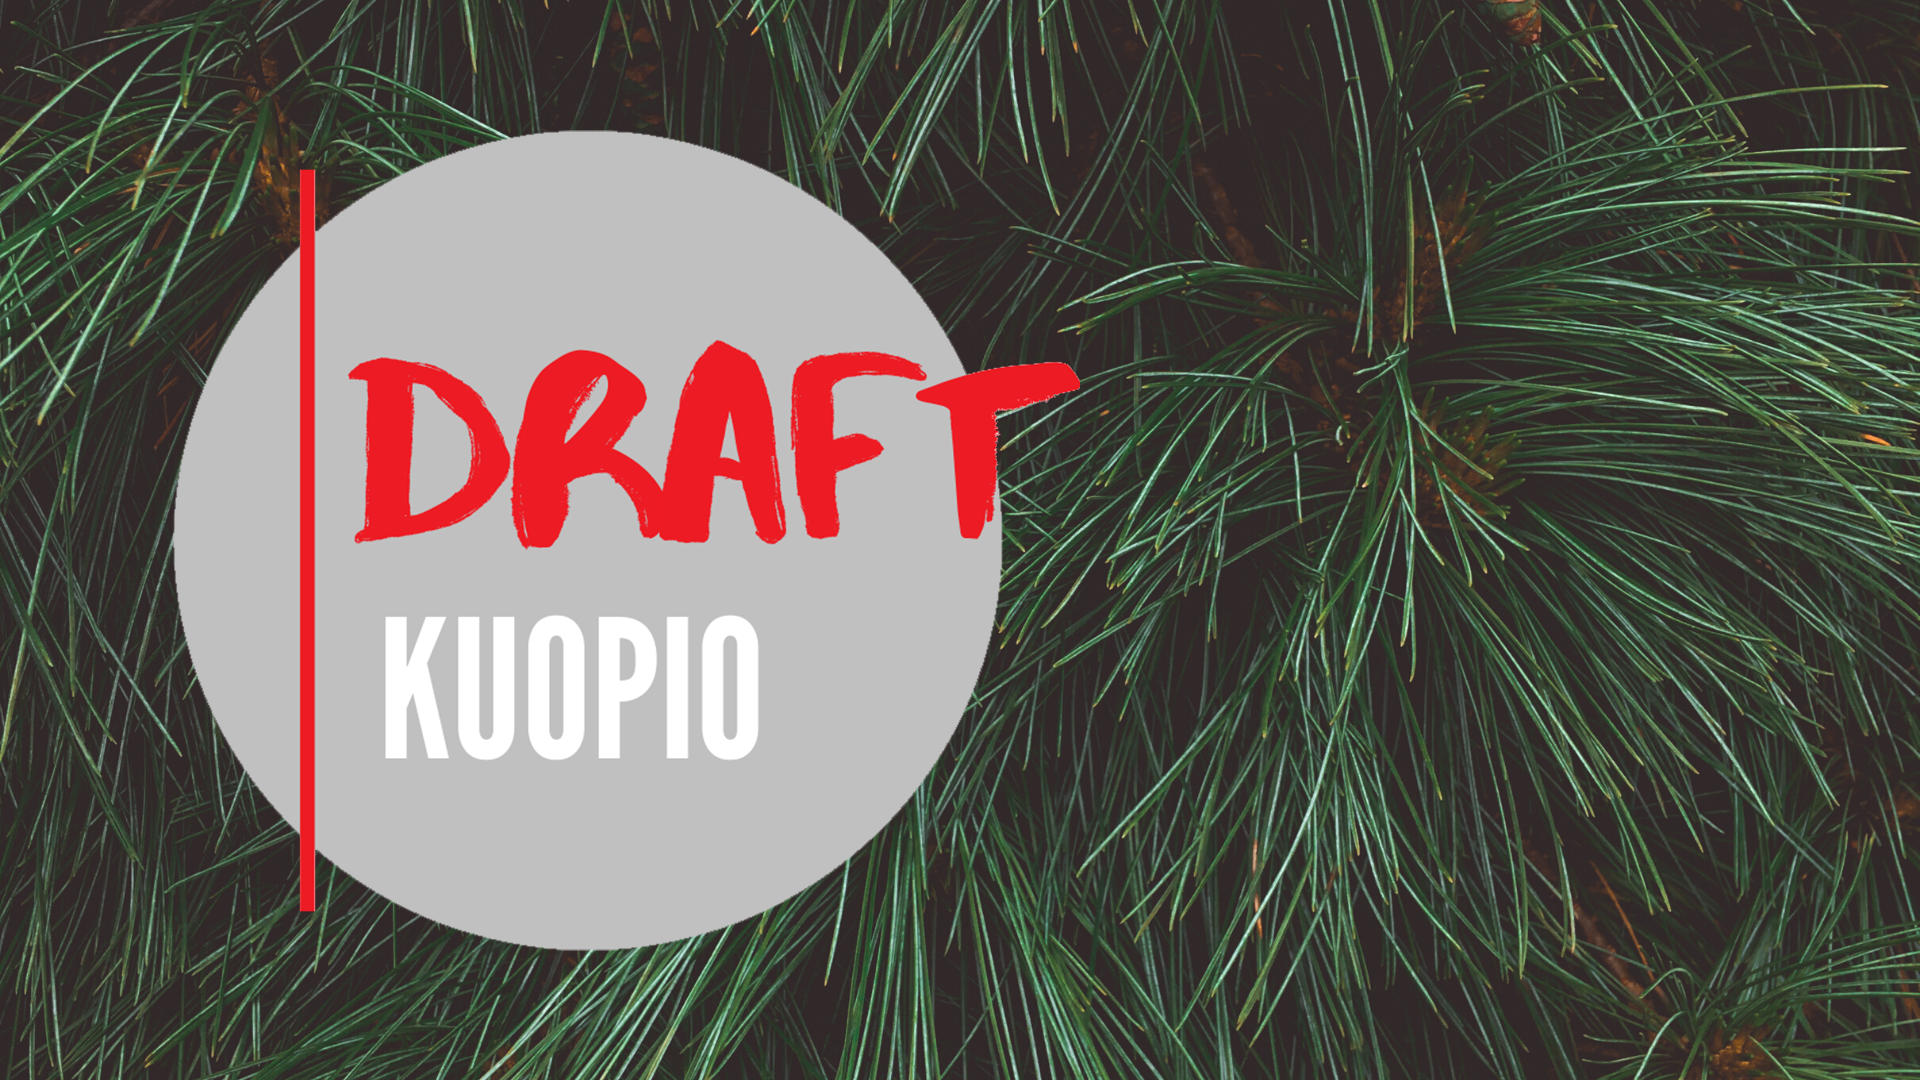 Applicants’ expertise convinced in the Draft business idea competition in Kuopio